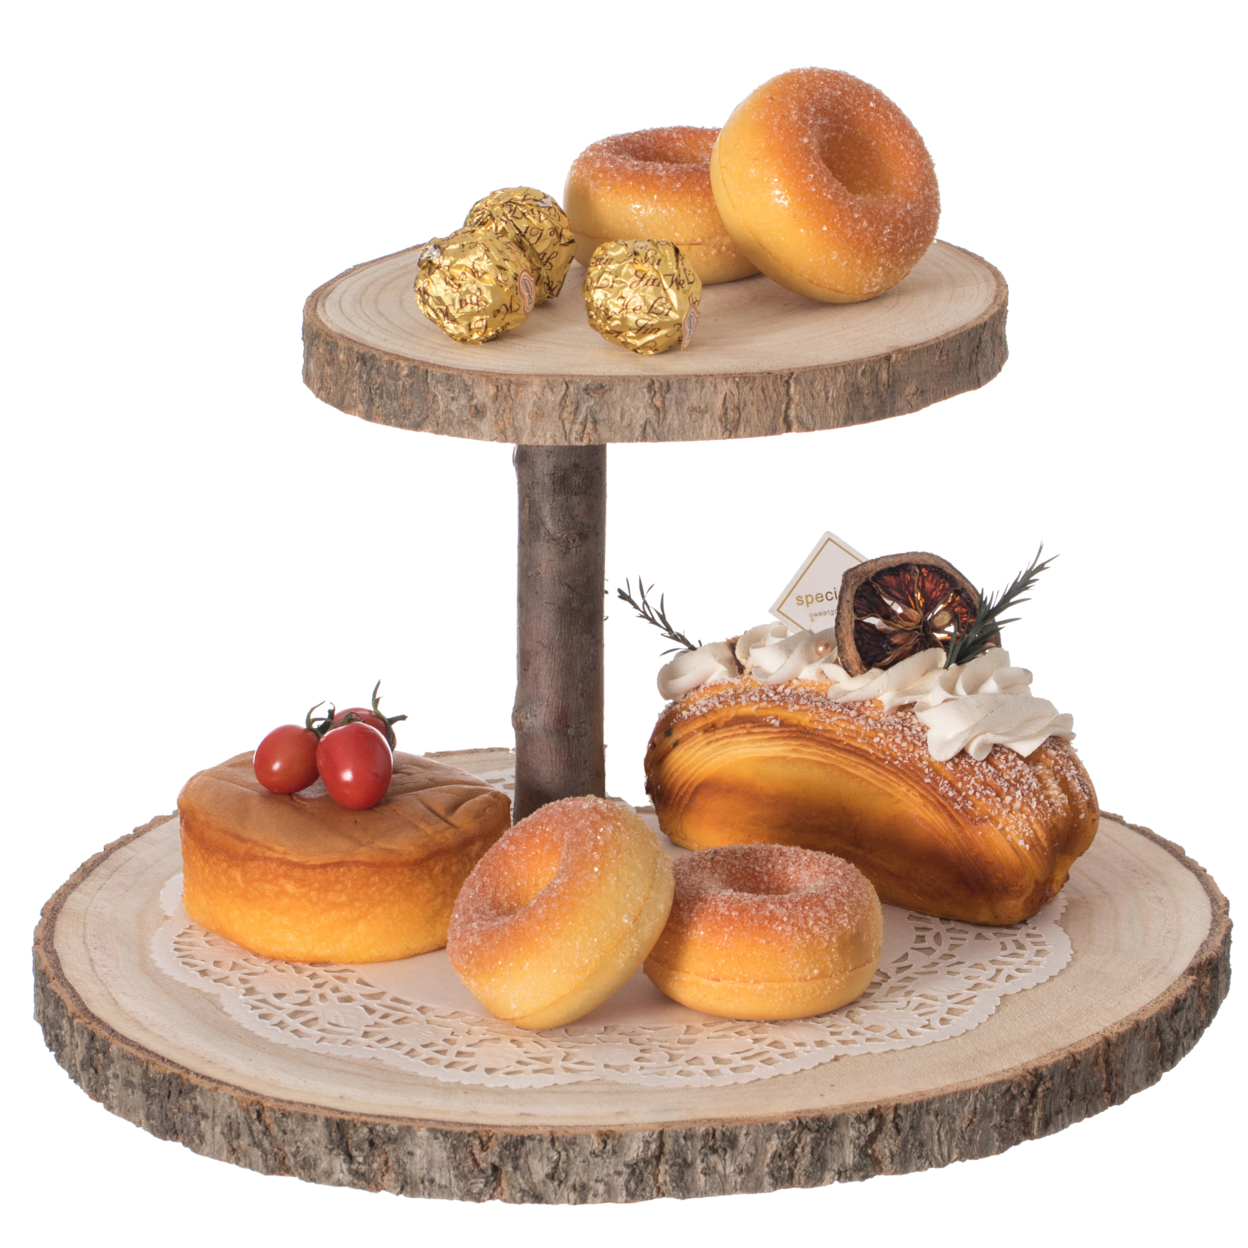 Two Tier Natural Wood Color Tree Bark Server Tray With Rustic Appeal, Two Sizes Trays